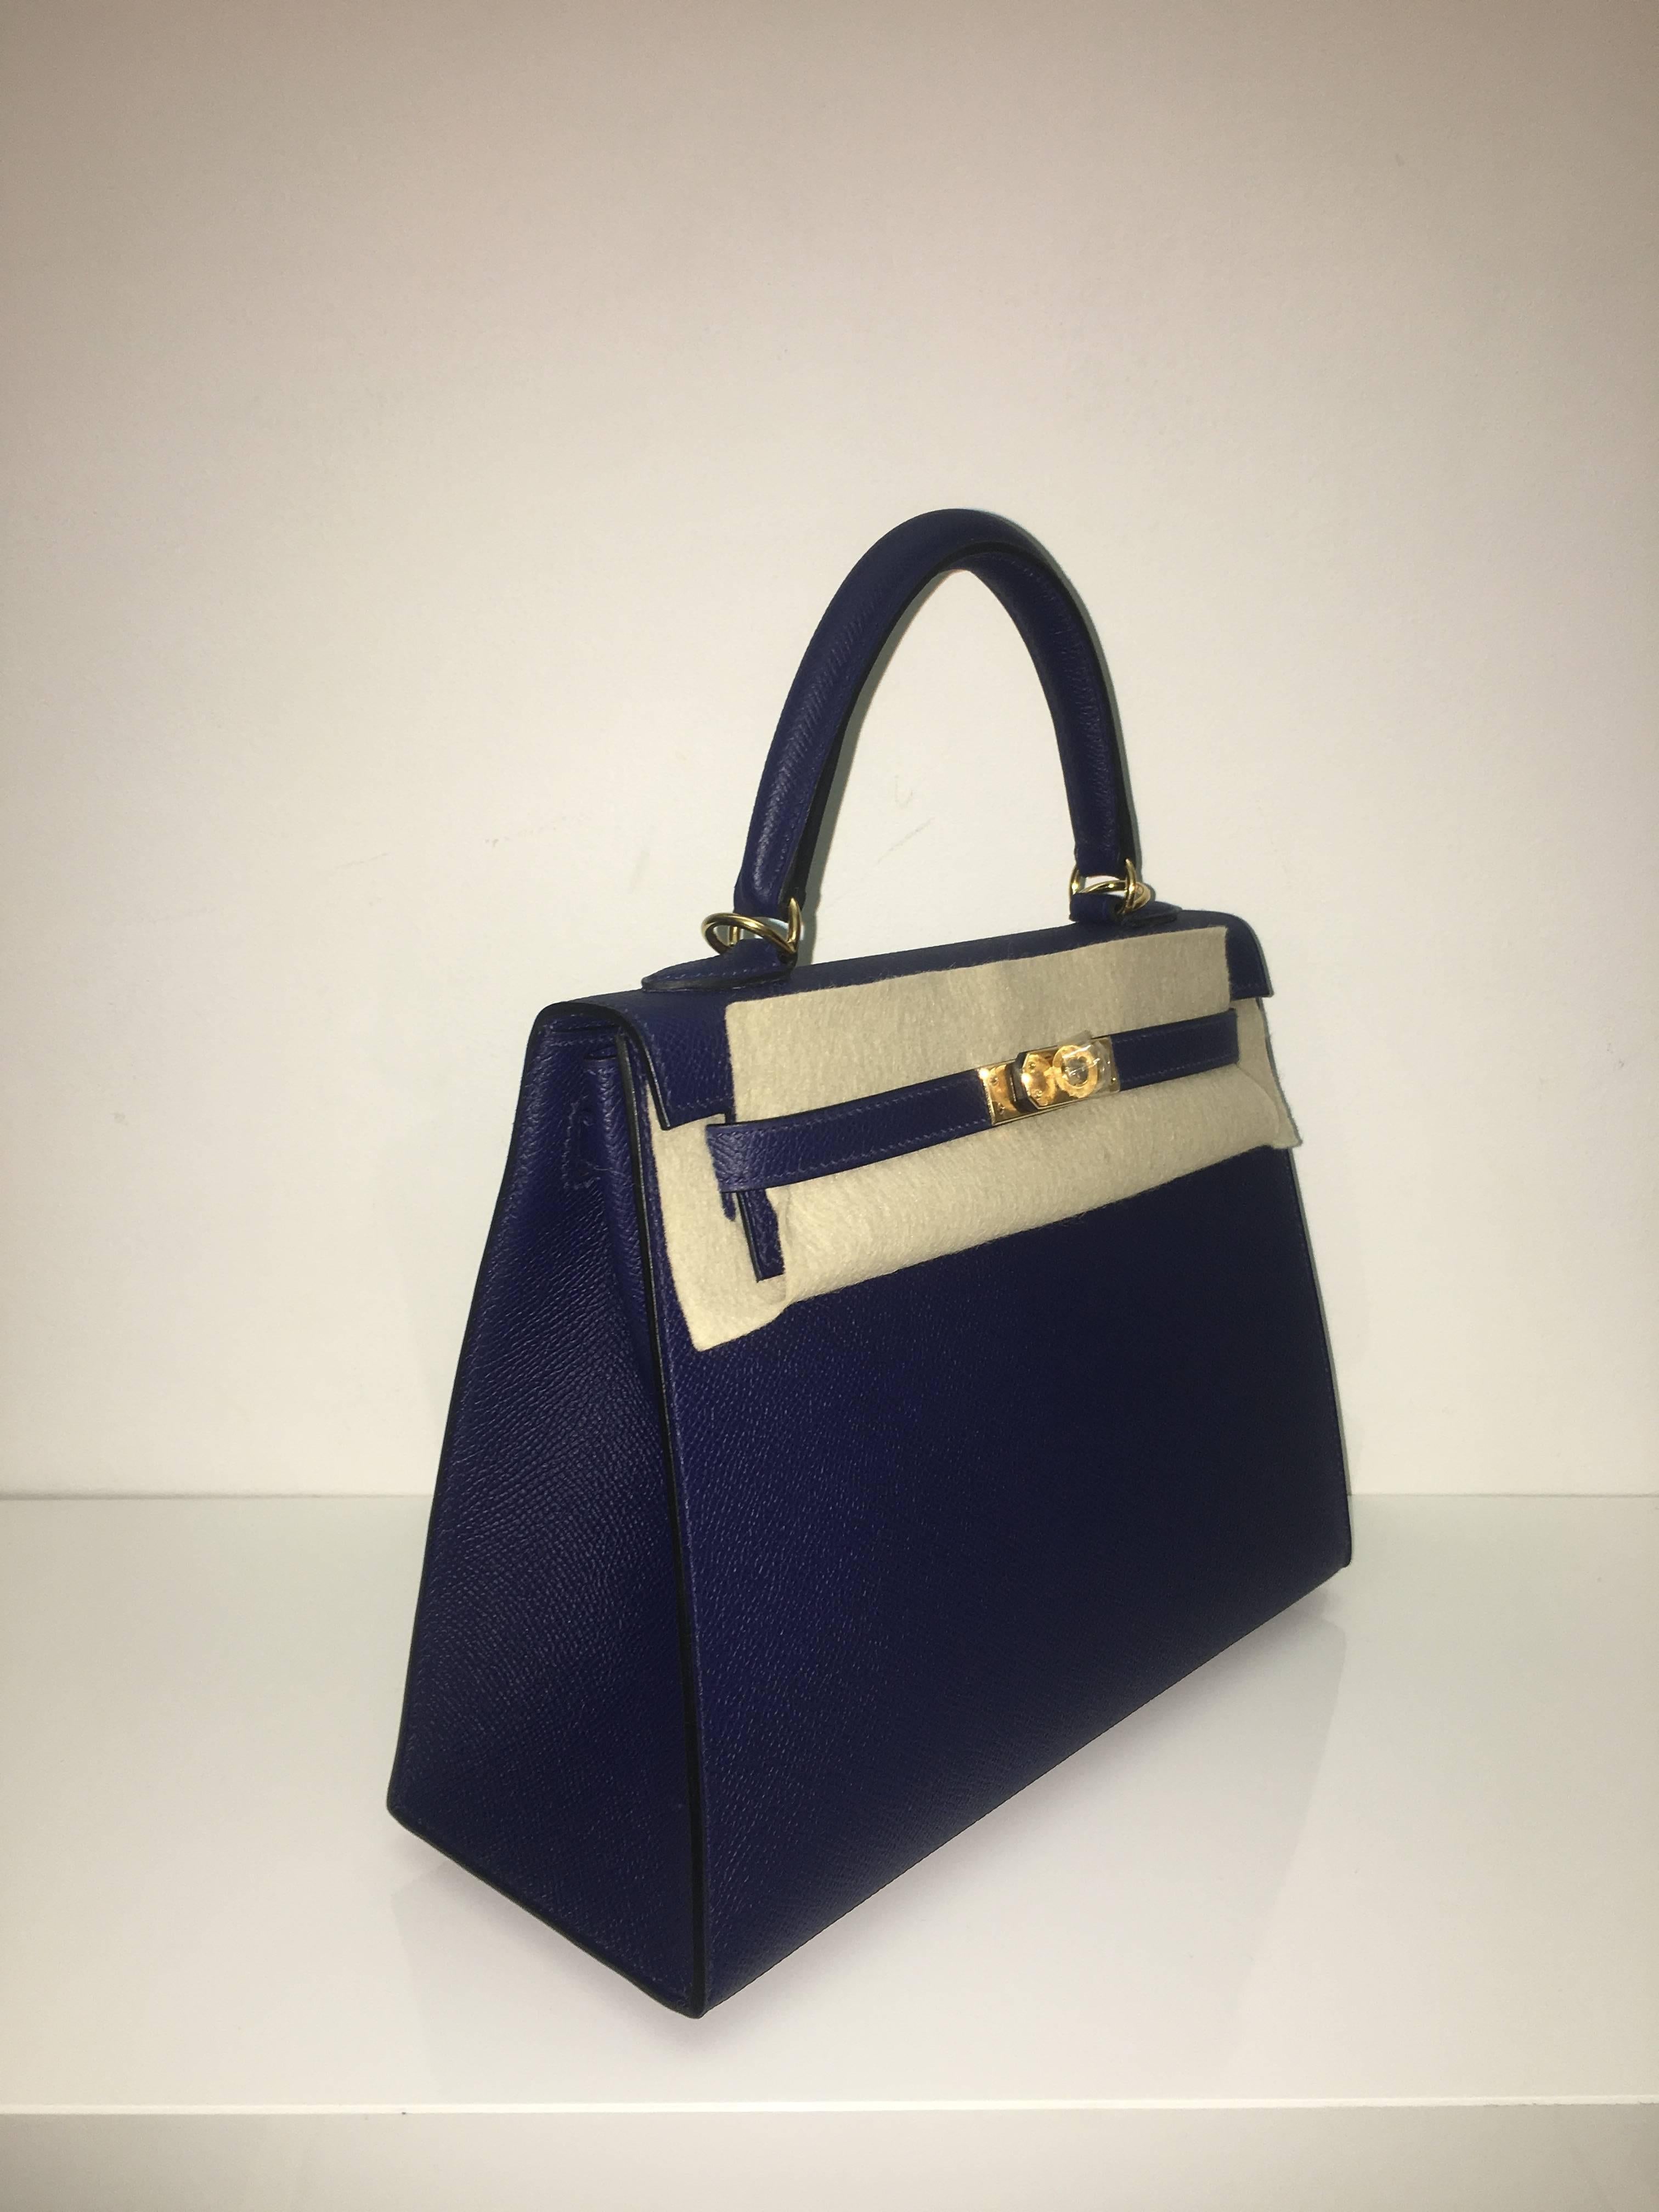 Hermes 
Kelly Size 25
Epsom Leather 
Colour Blue Sapphire
Gold Hardware 
store fresh, comes with receipt and full set (dust bag, box...) 
Hydeparkfashion specializes in sourcing and delivering authentic luxury handbags, mainly Hermes, to